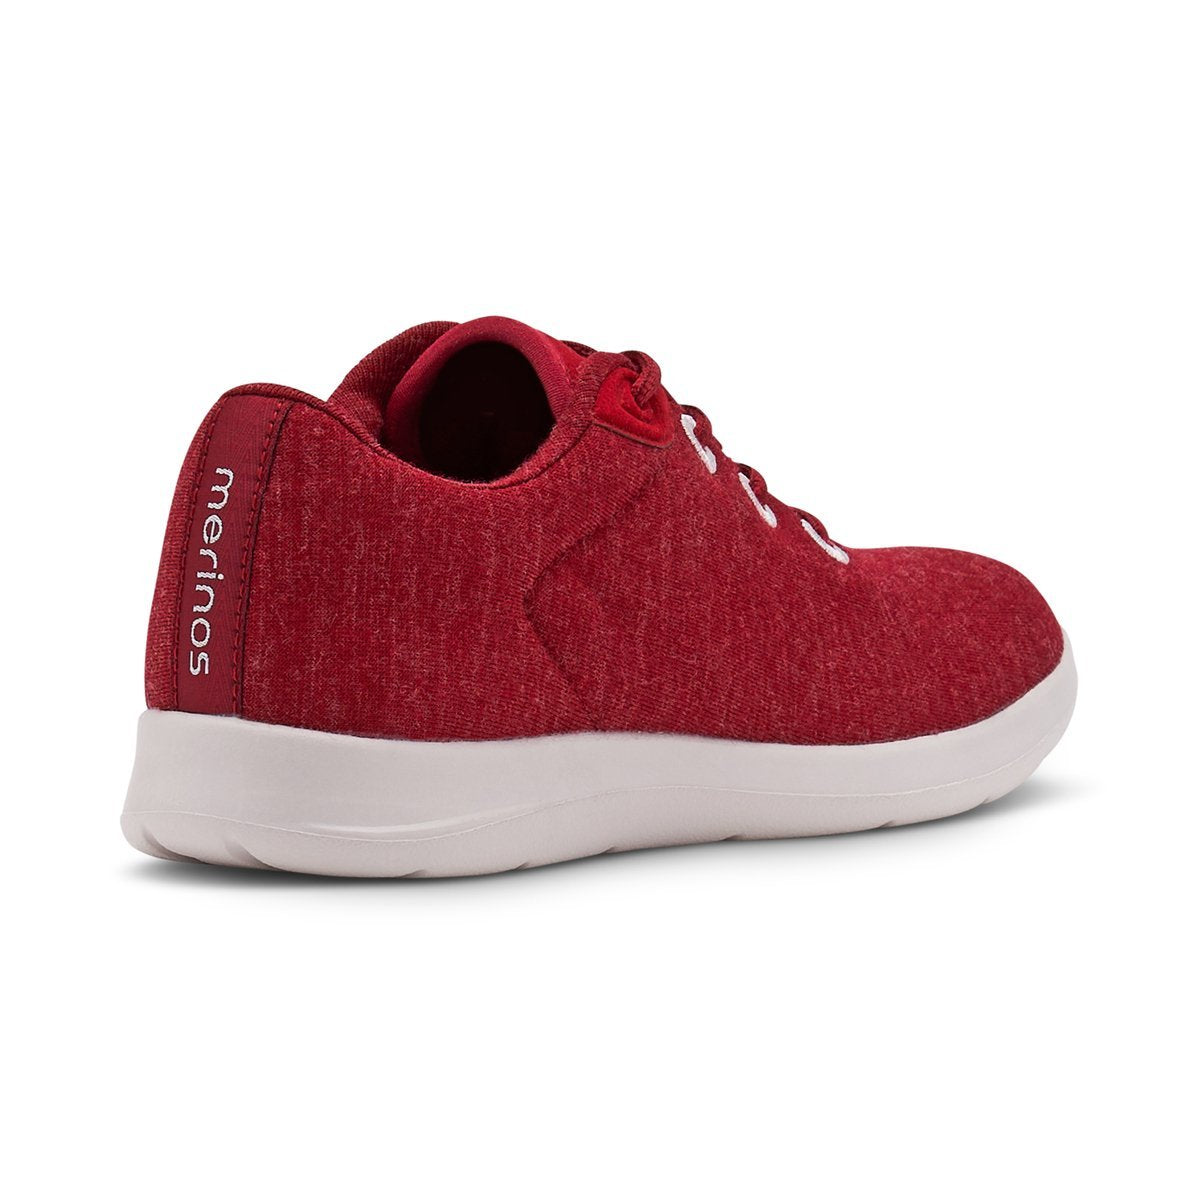 Men's Lace-Ups Maroon - Special Offer